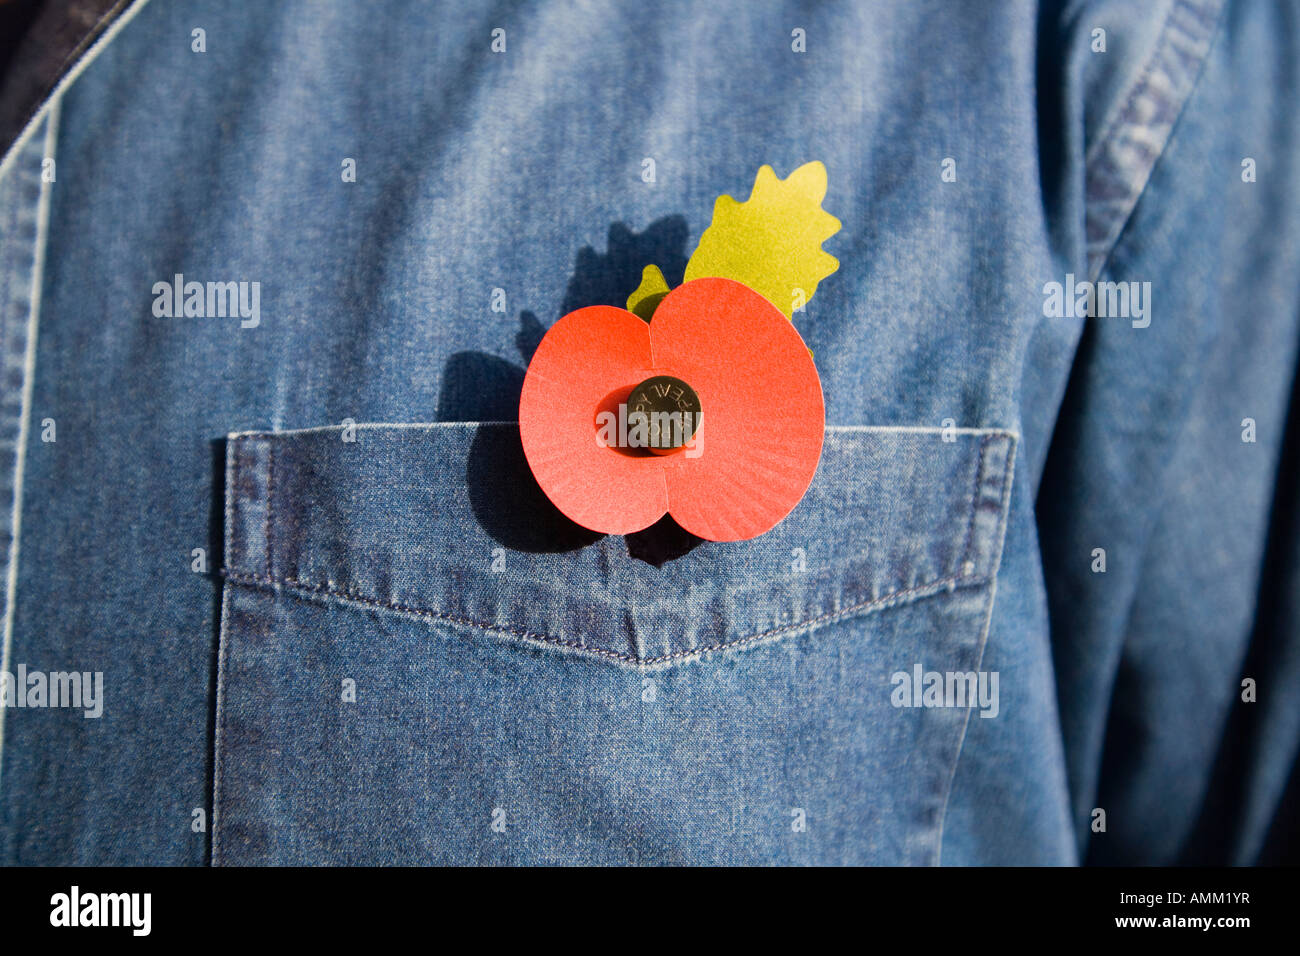 remembrance poppy on a shirt